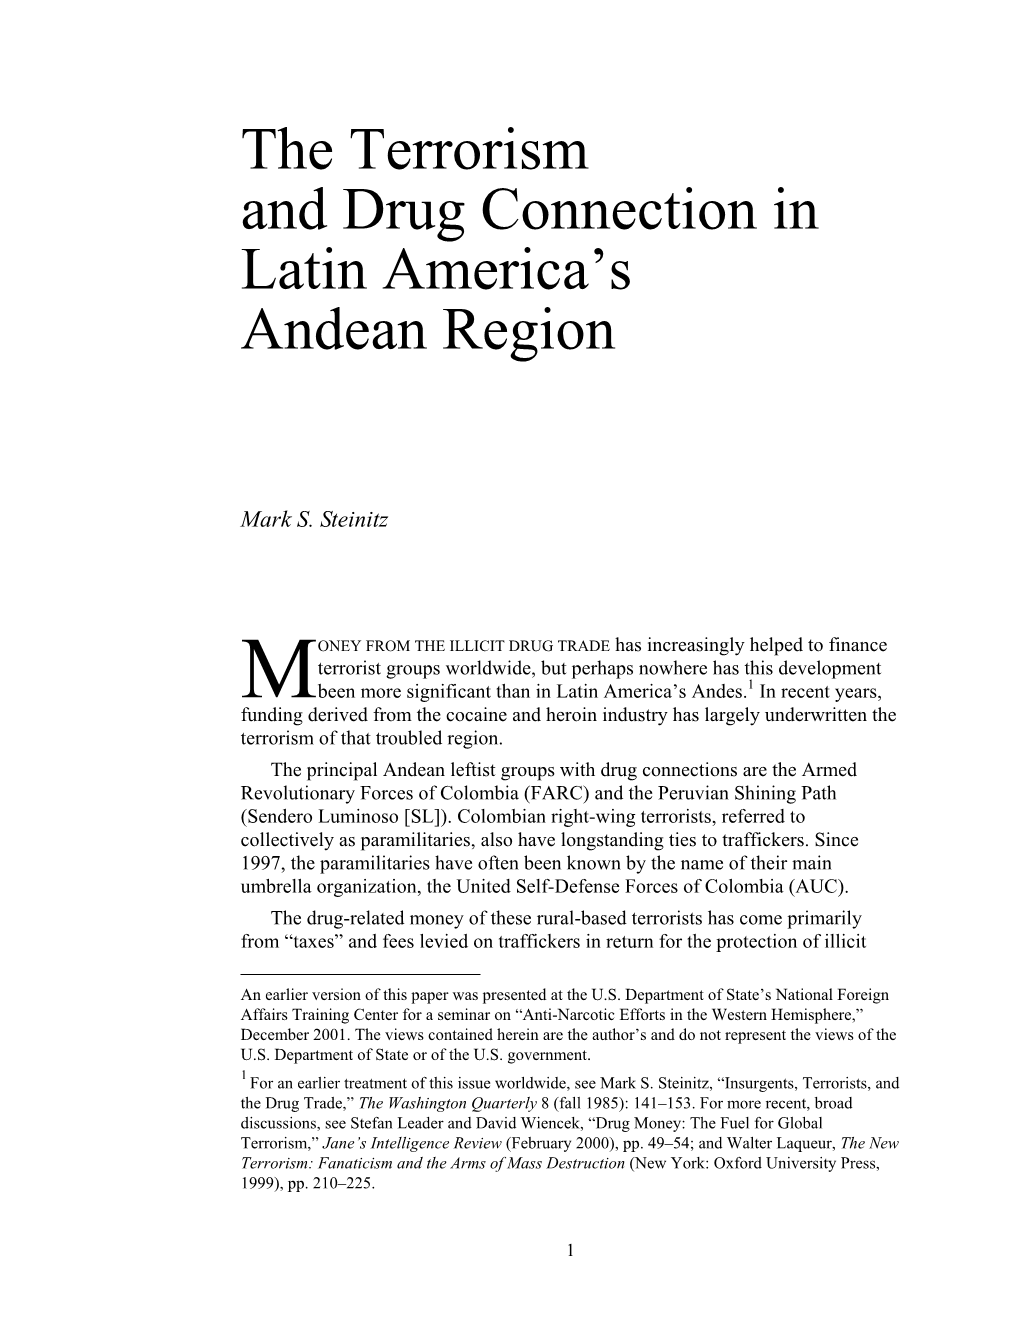 The Terrorism and Drug Connection in Latin America's Andean Region